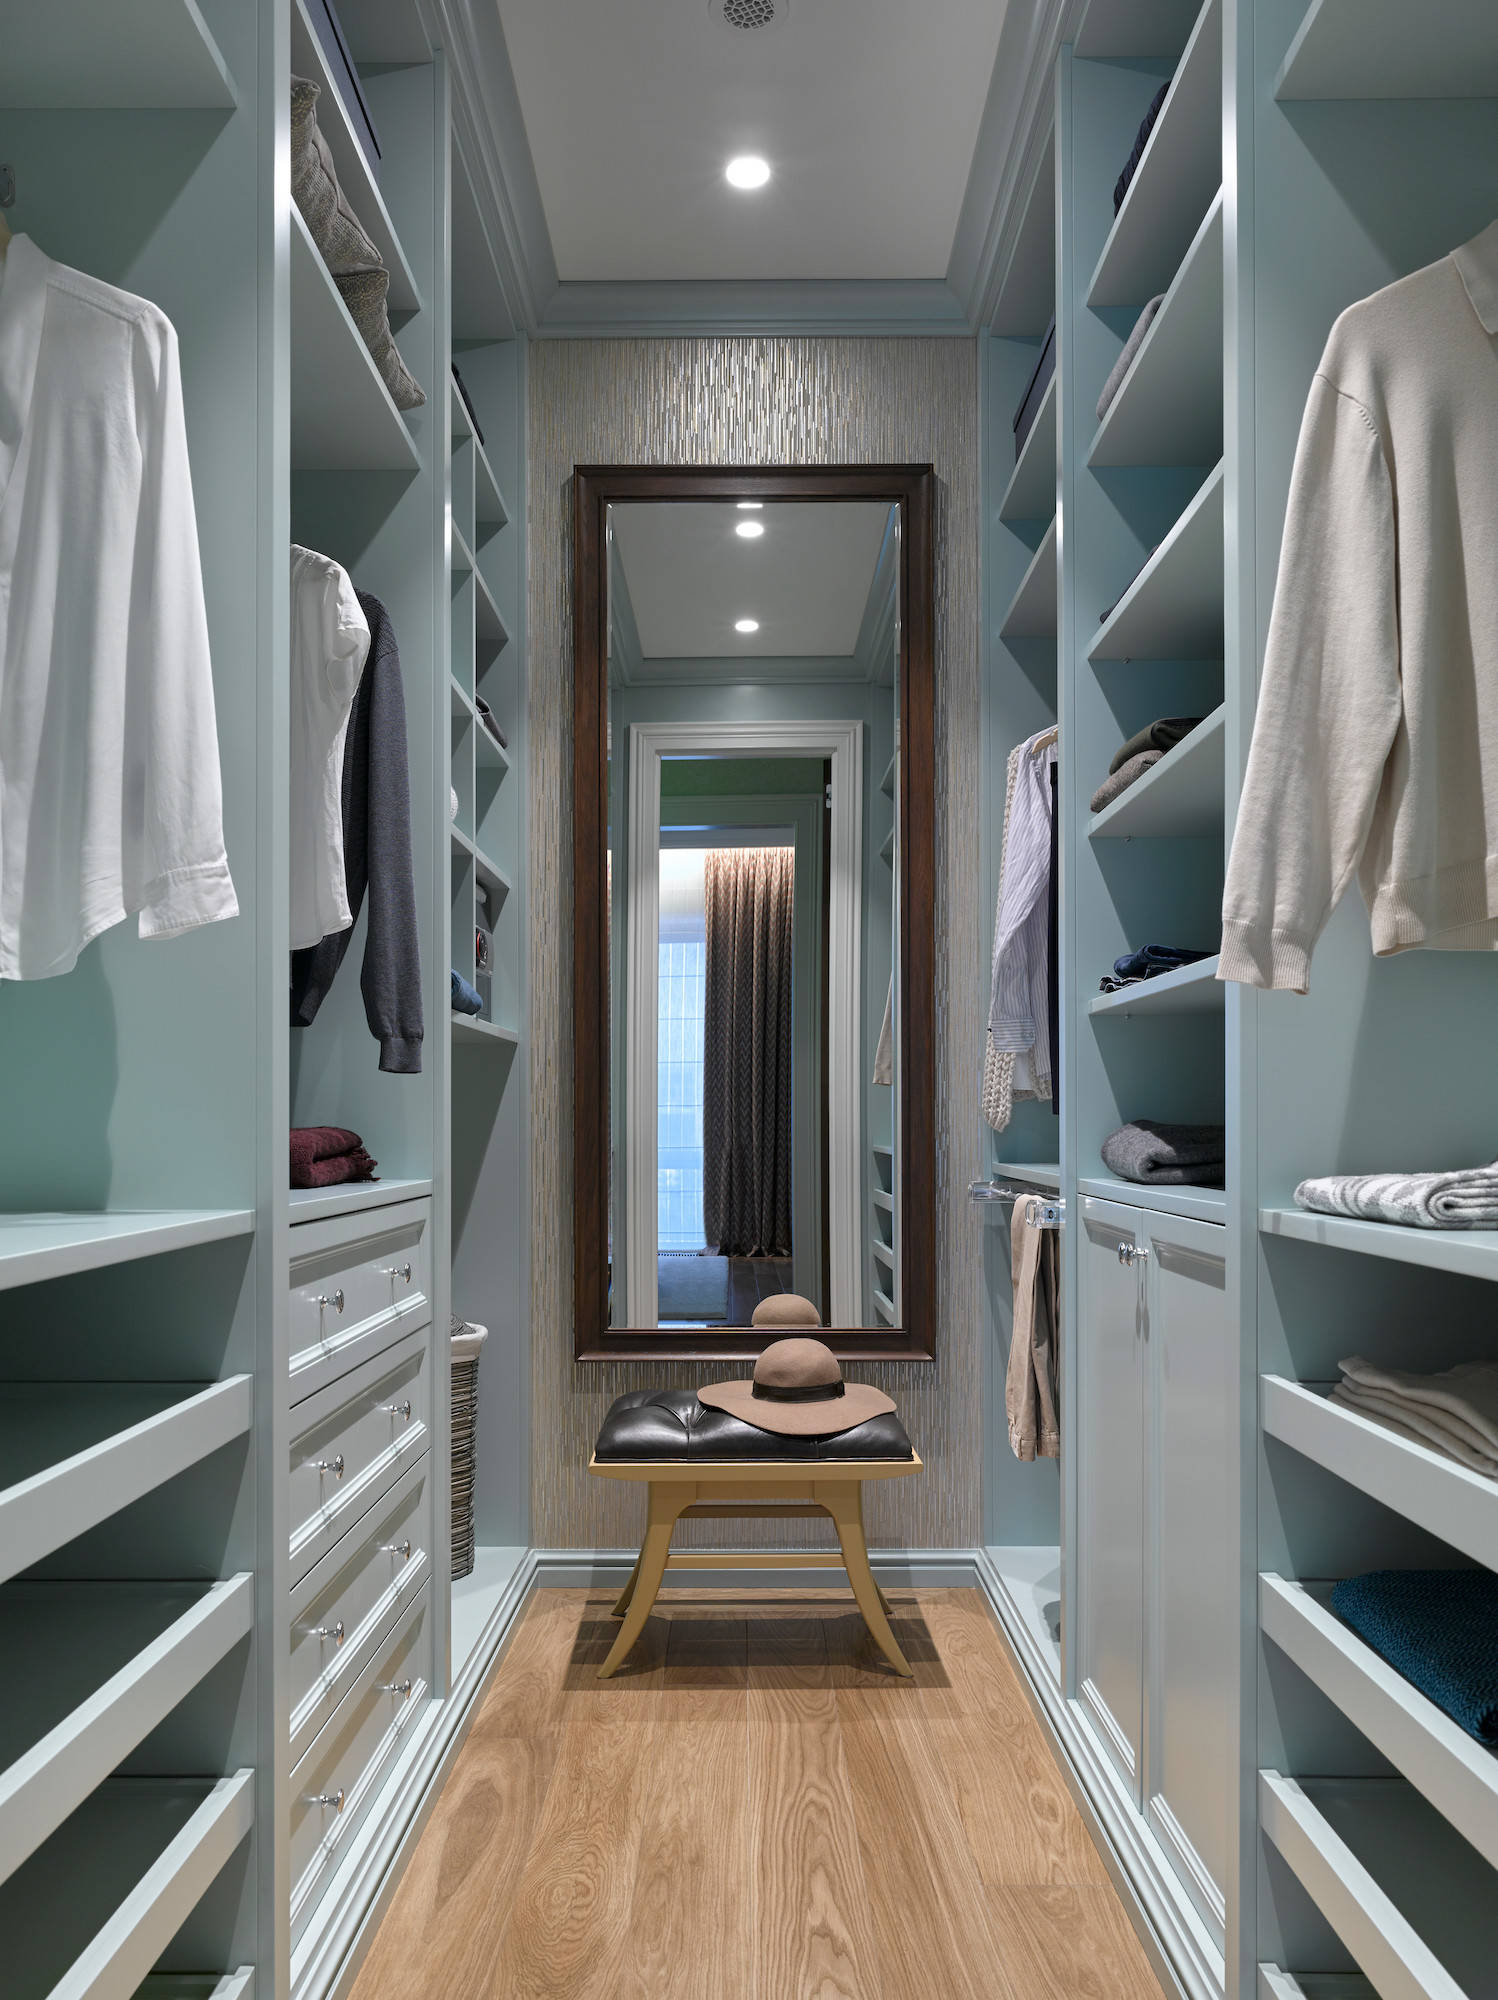 Small Walk In Closet Pictures Ideas, Small Walk In Closet Shelving Ideas